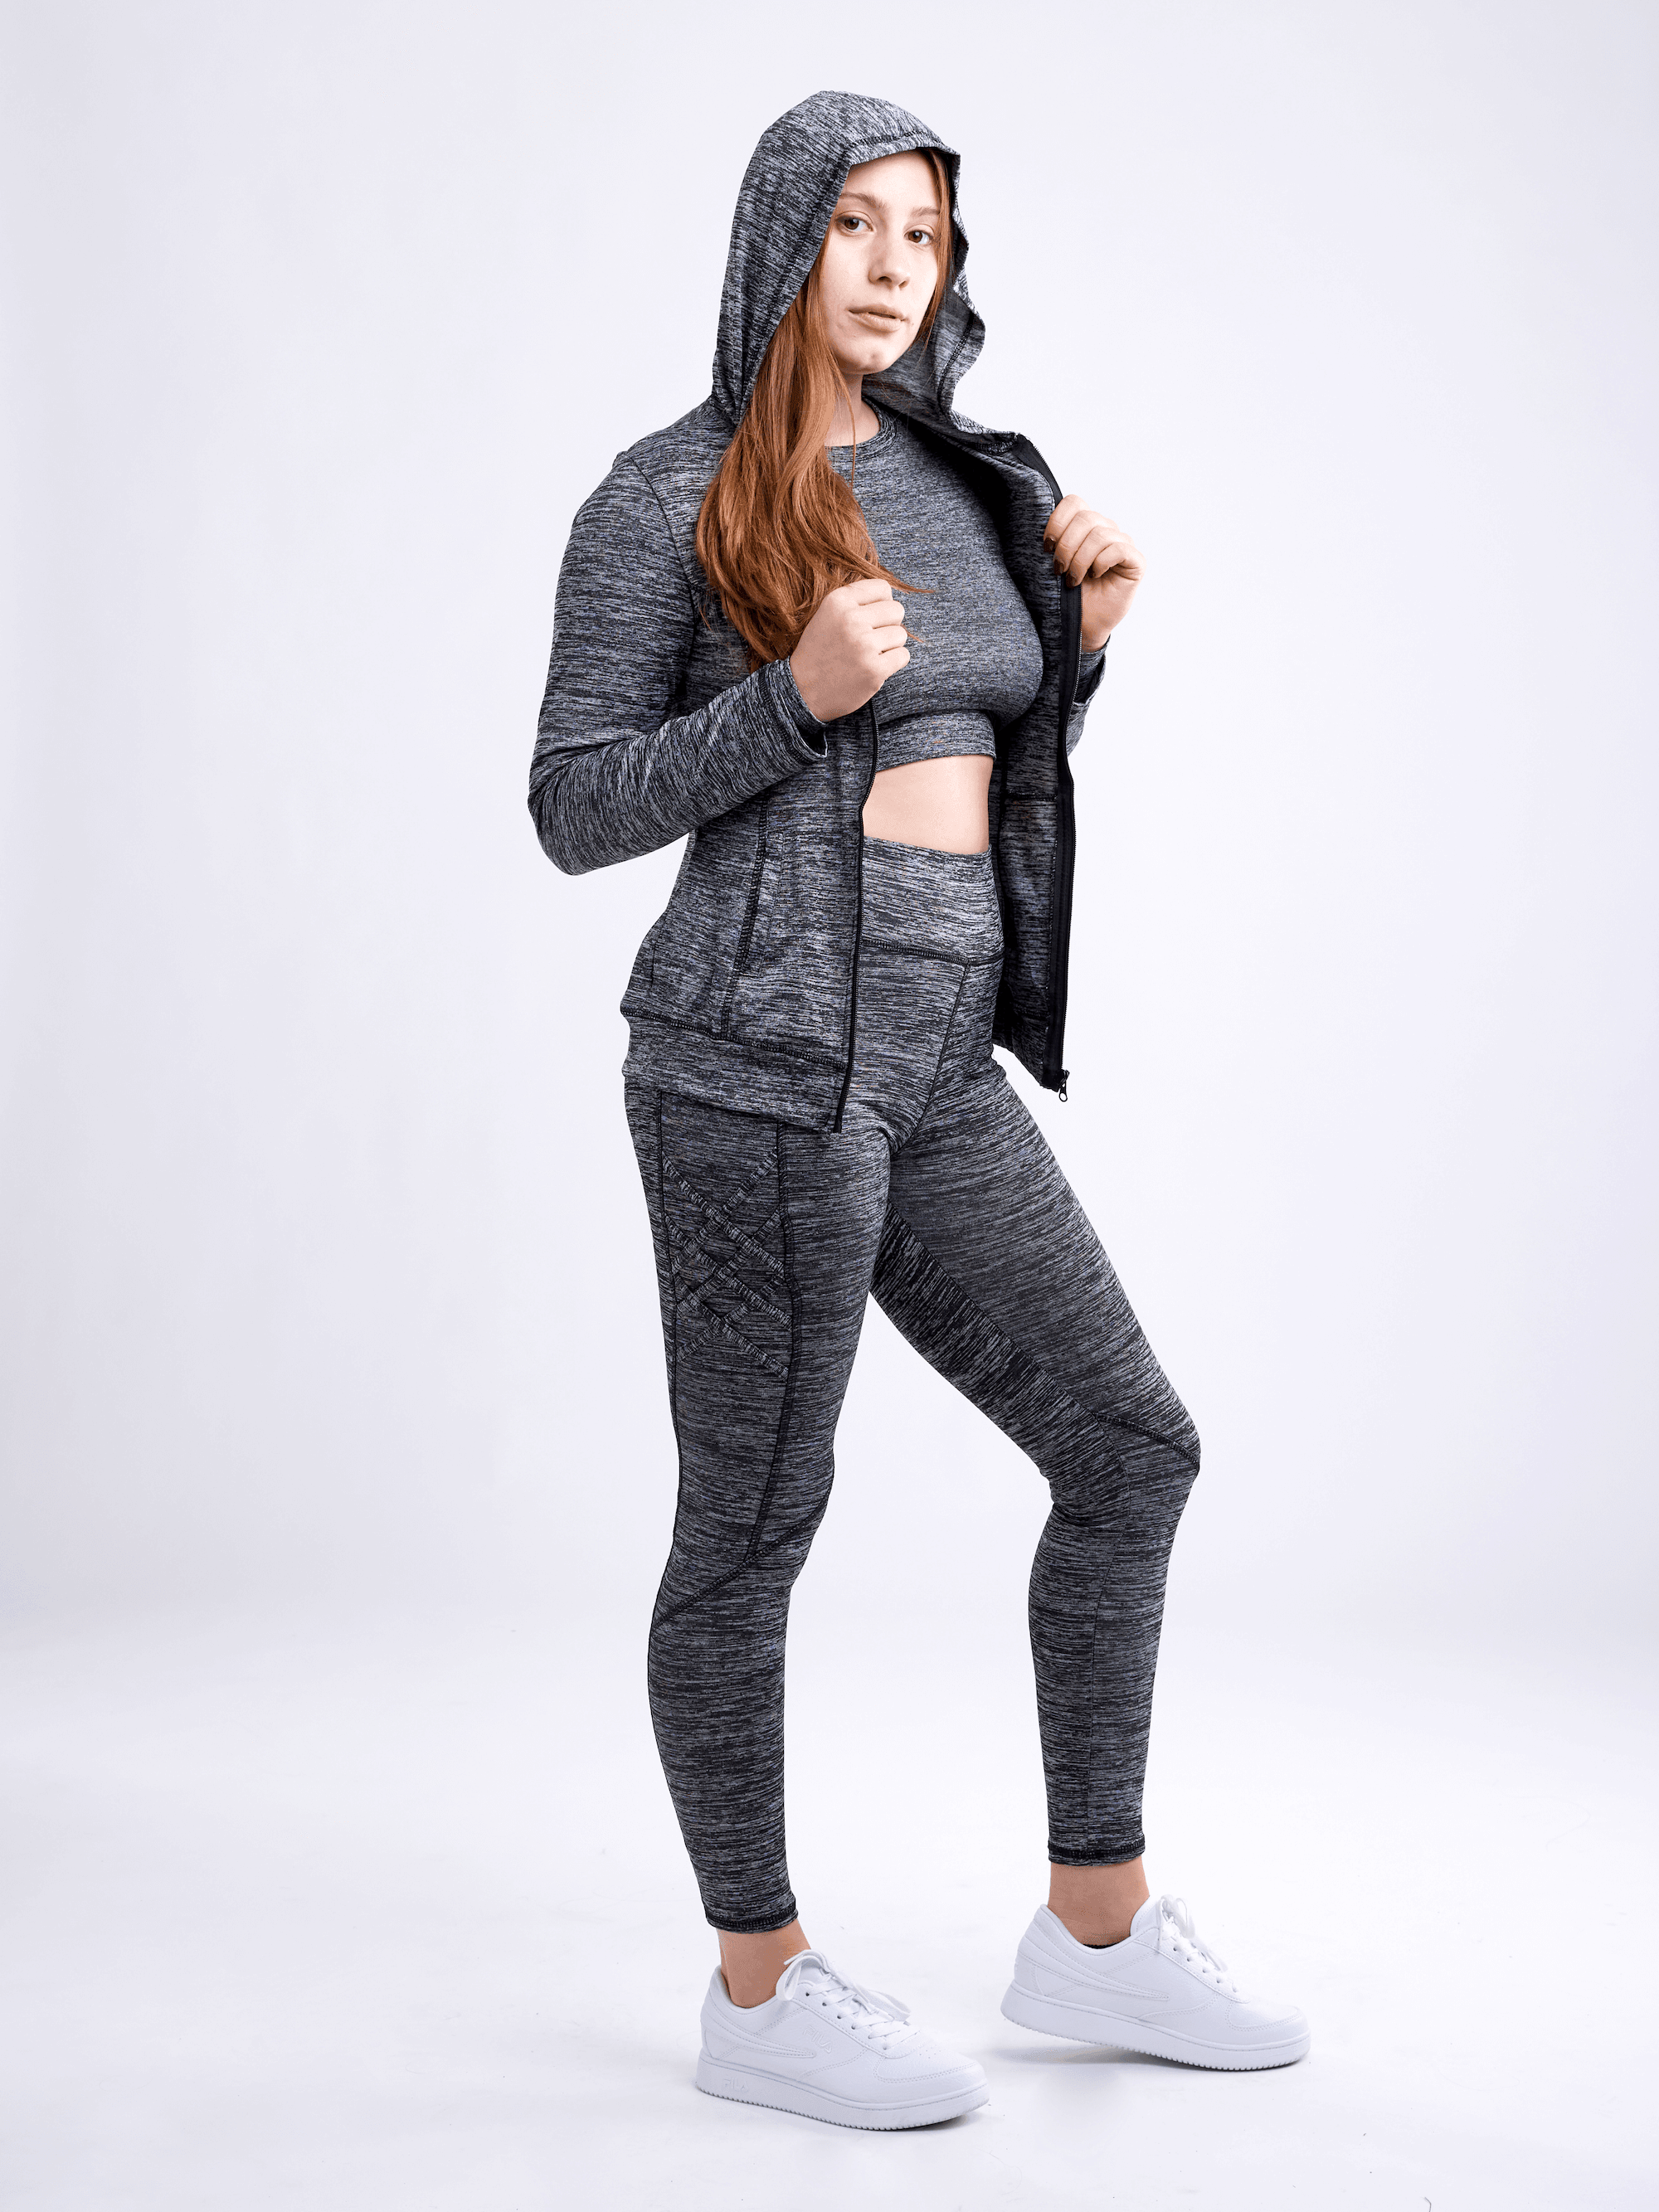 High-Waisted Criss-Cross Training Leggings with Hip Pockets - VirtuousWares:Global